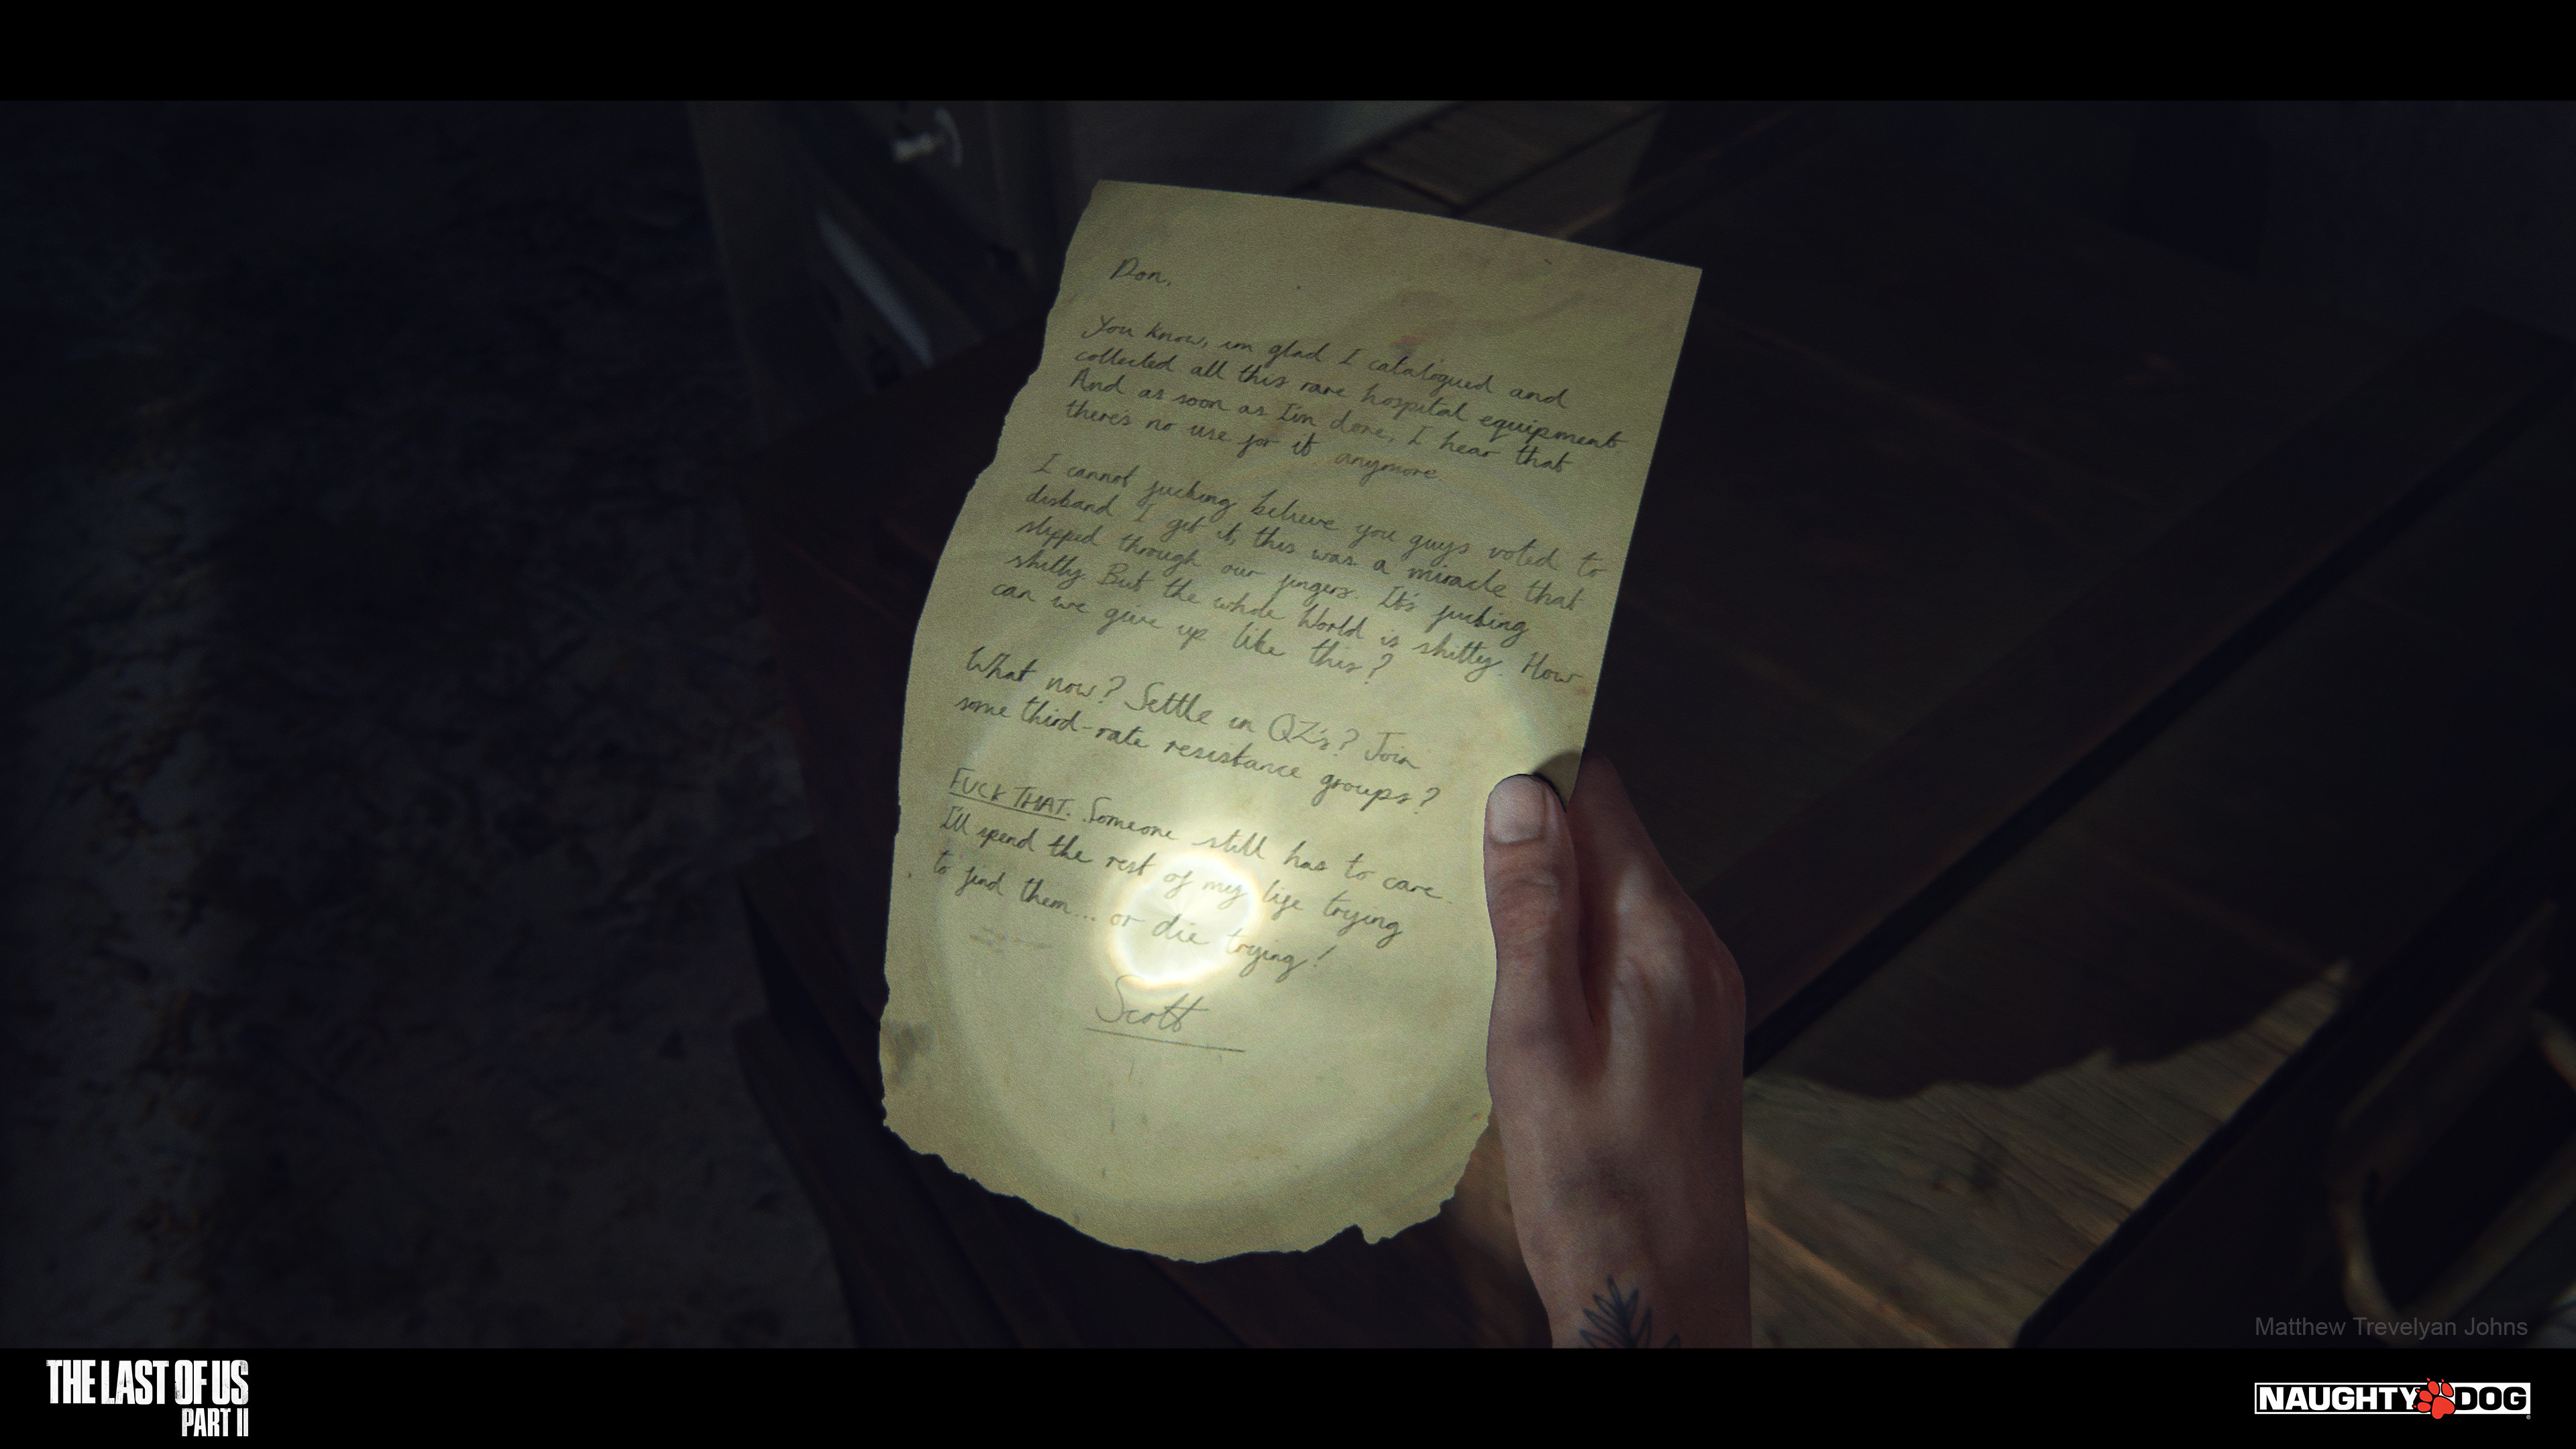 This one was also a personal goal of mine, I loved the notes that are often hidden throughout Naughty Dog games, the hand-writing here is my own! Being from the UK my handwriting is naturally squiggly and illegible 